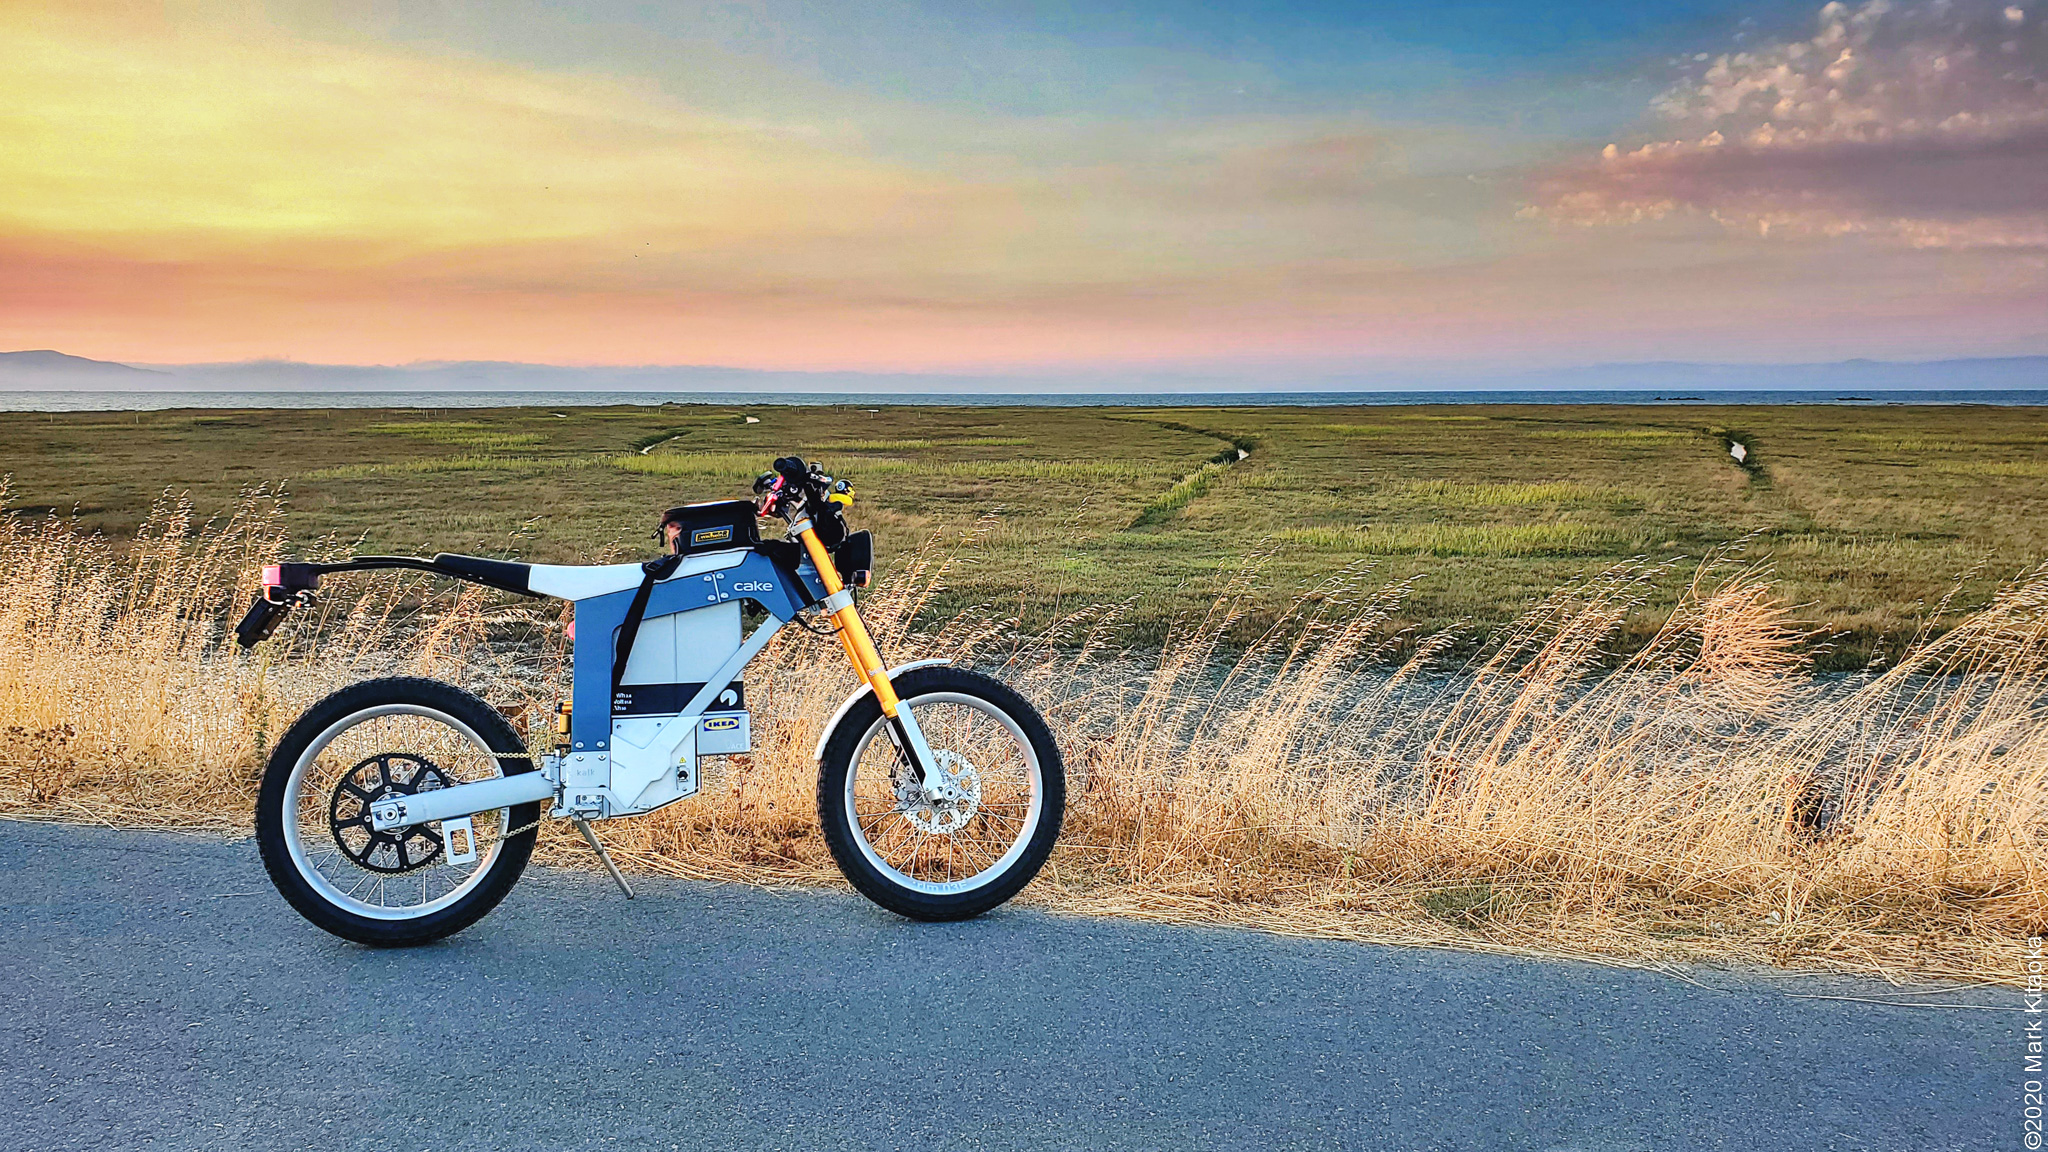 This Electric Dirt Bike Is Not Quite A Motorcycle But Way More Than An  eBike - The Autopian